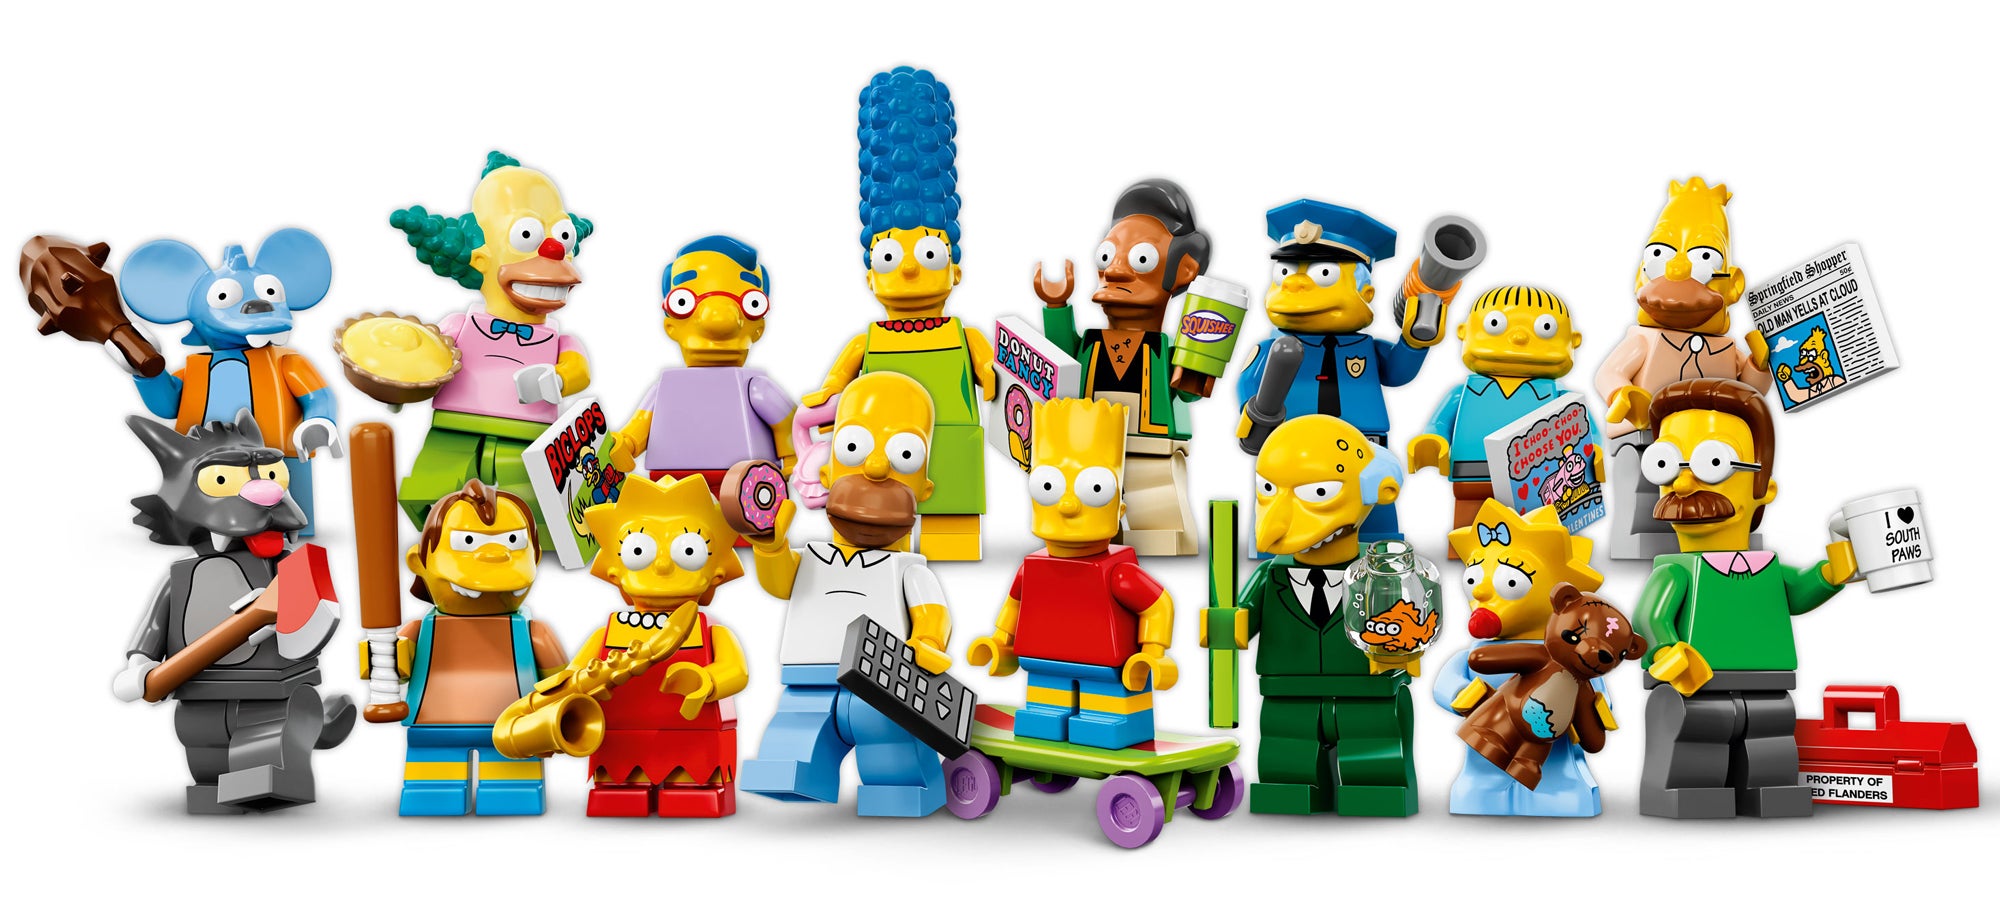 The New 16 Lego Simpsons Minifigs Are Awesome And I Want Them All